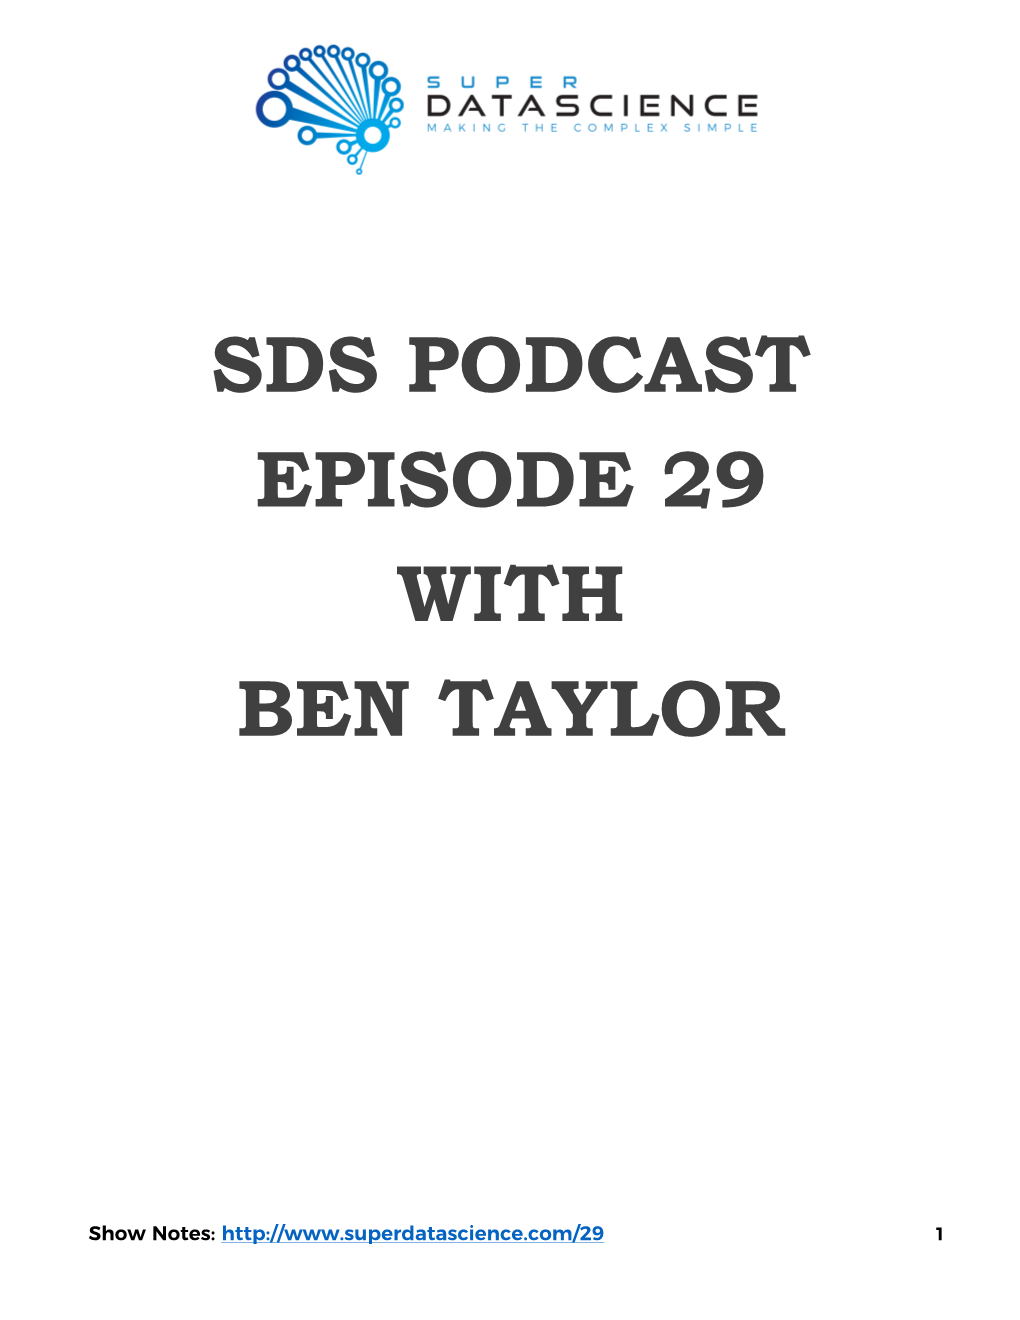 Sds Podcast Episode 29 with Ben Taylor